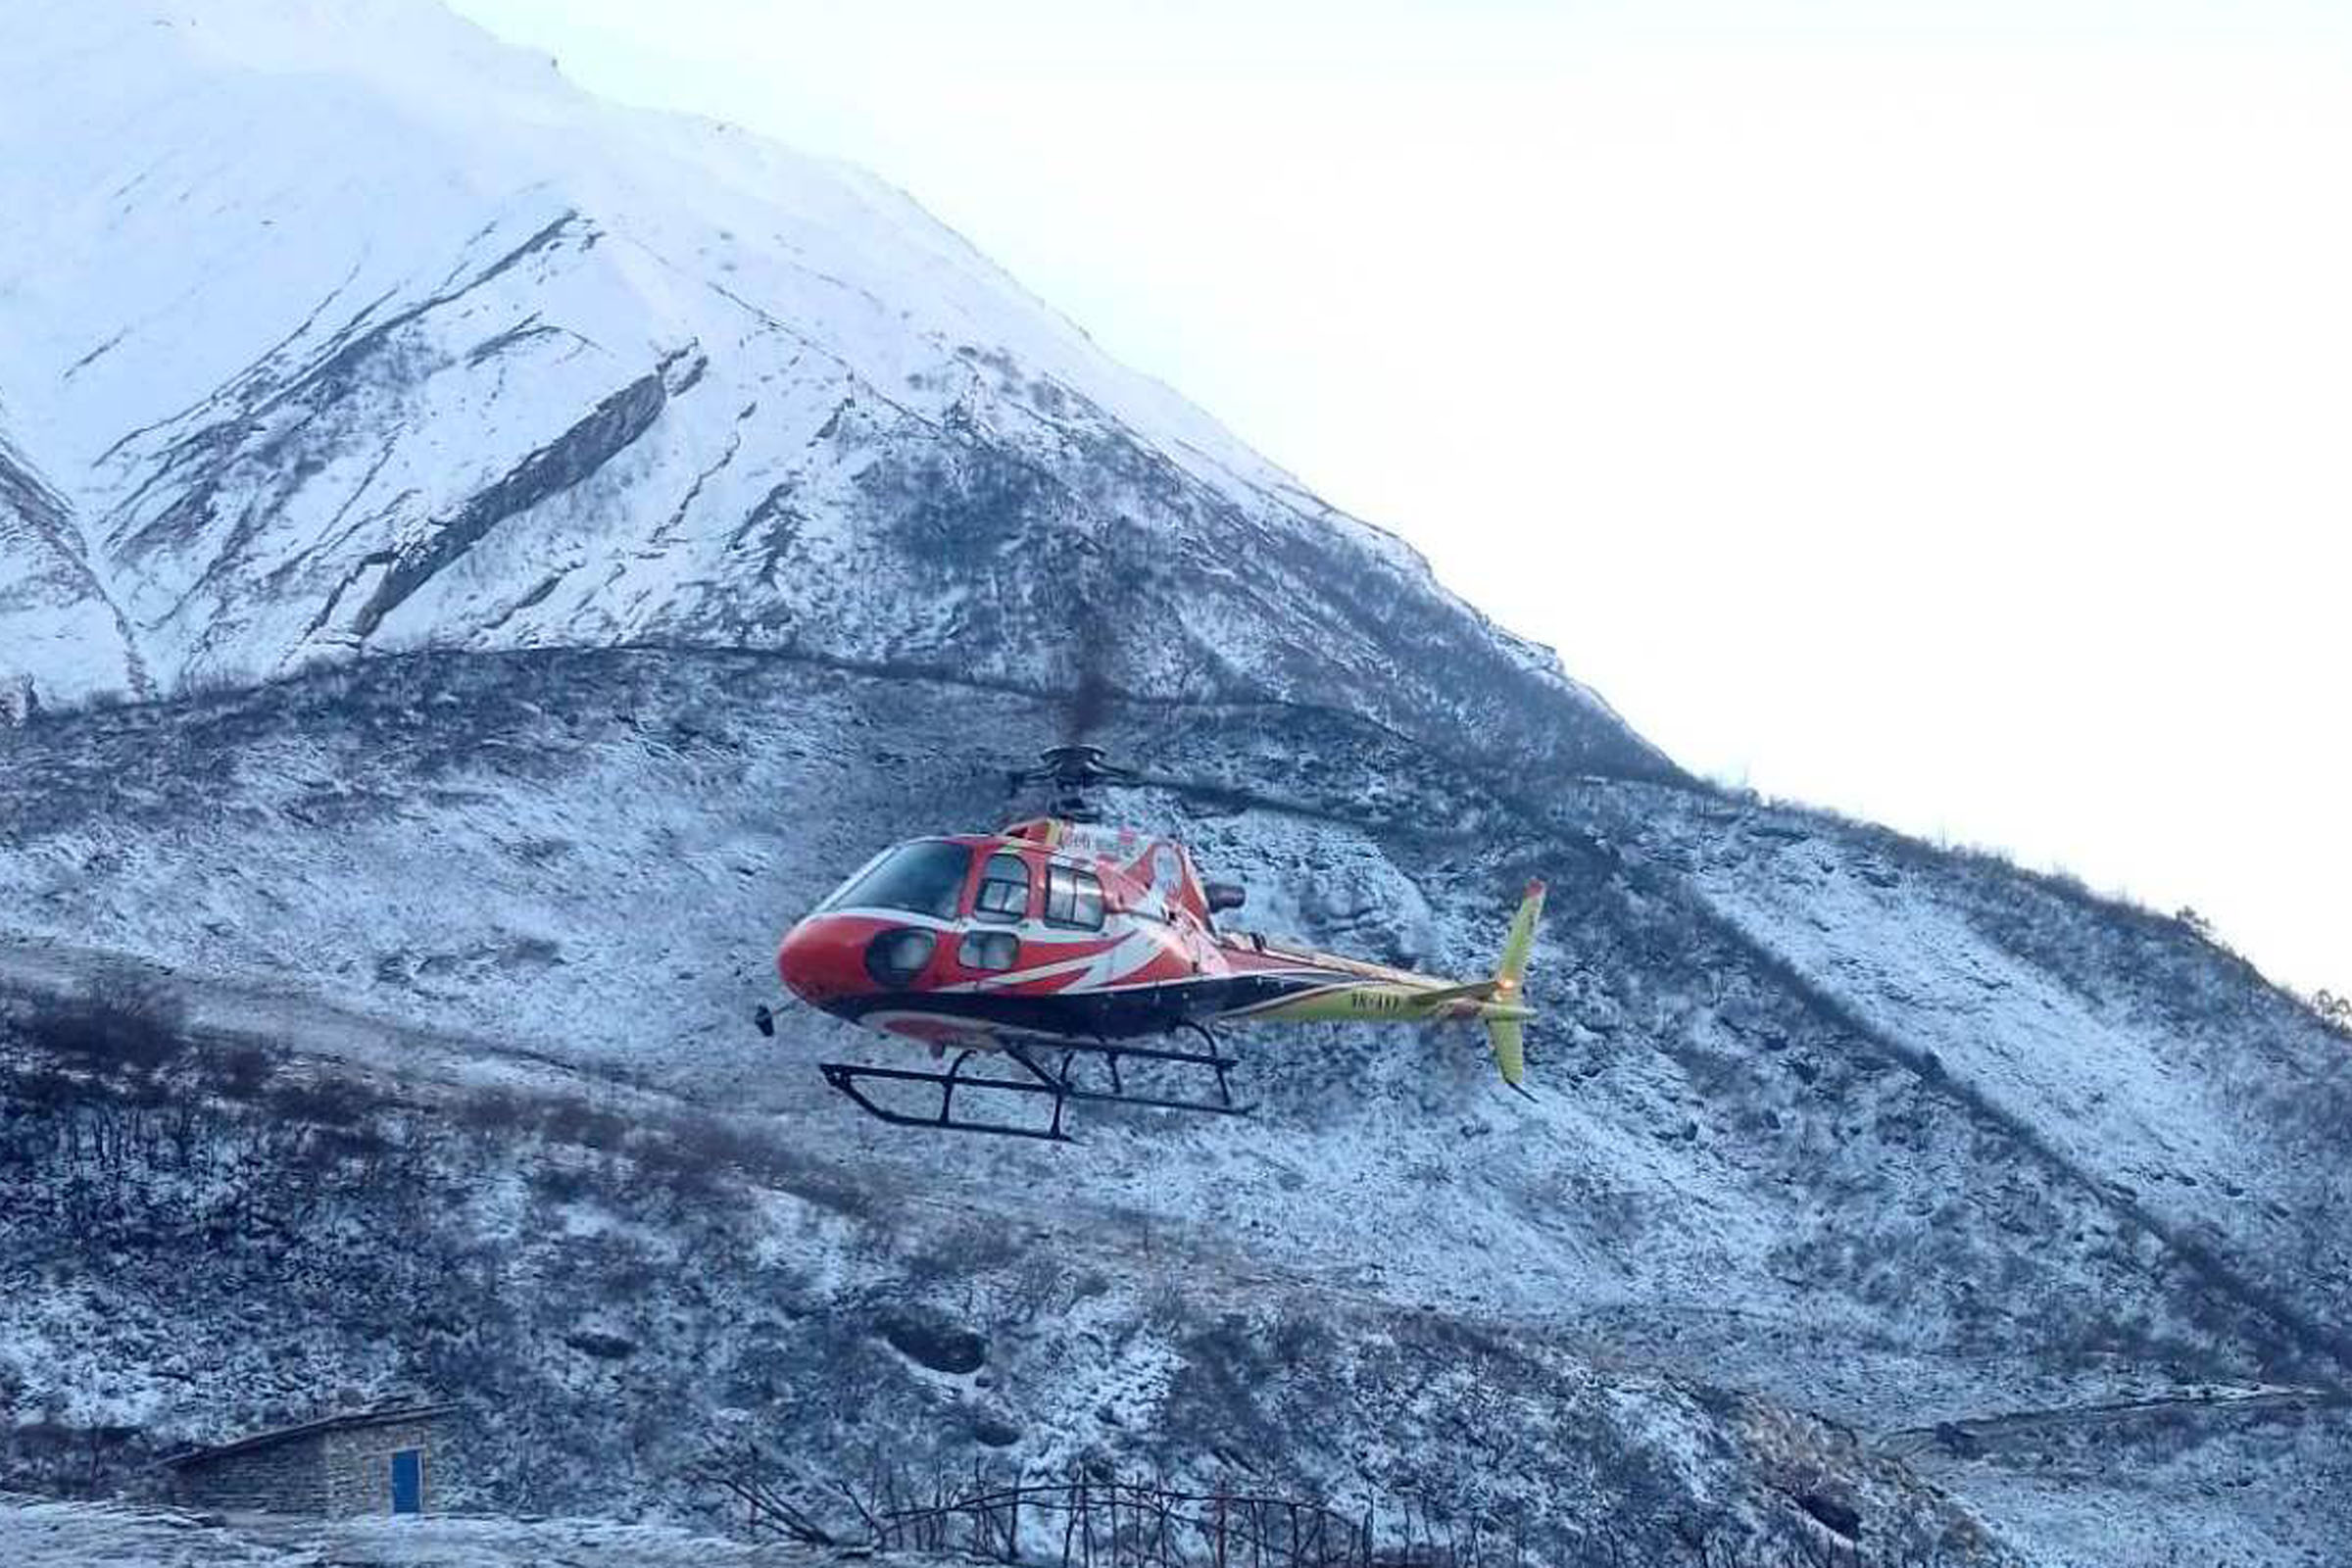 Six tourists, including four German nationals, rescued from Yakkharka in Dolpa